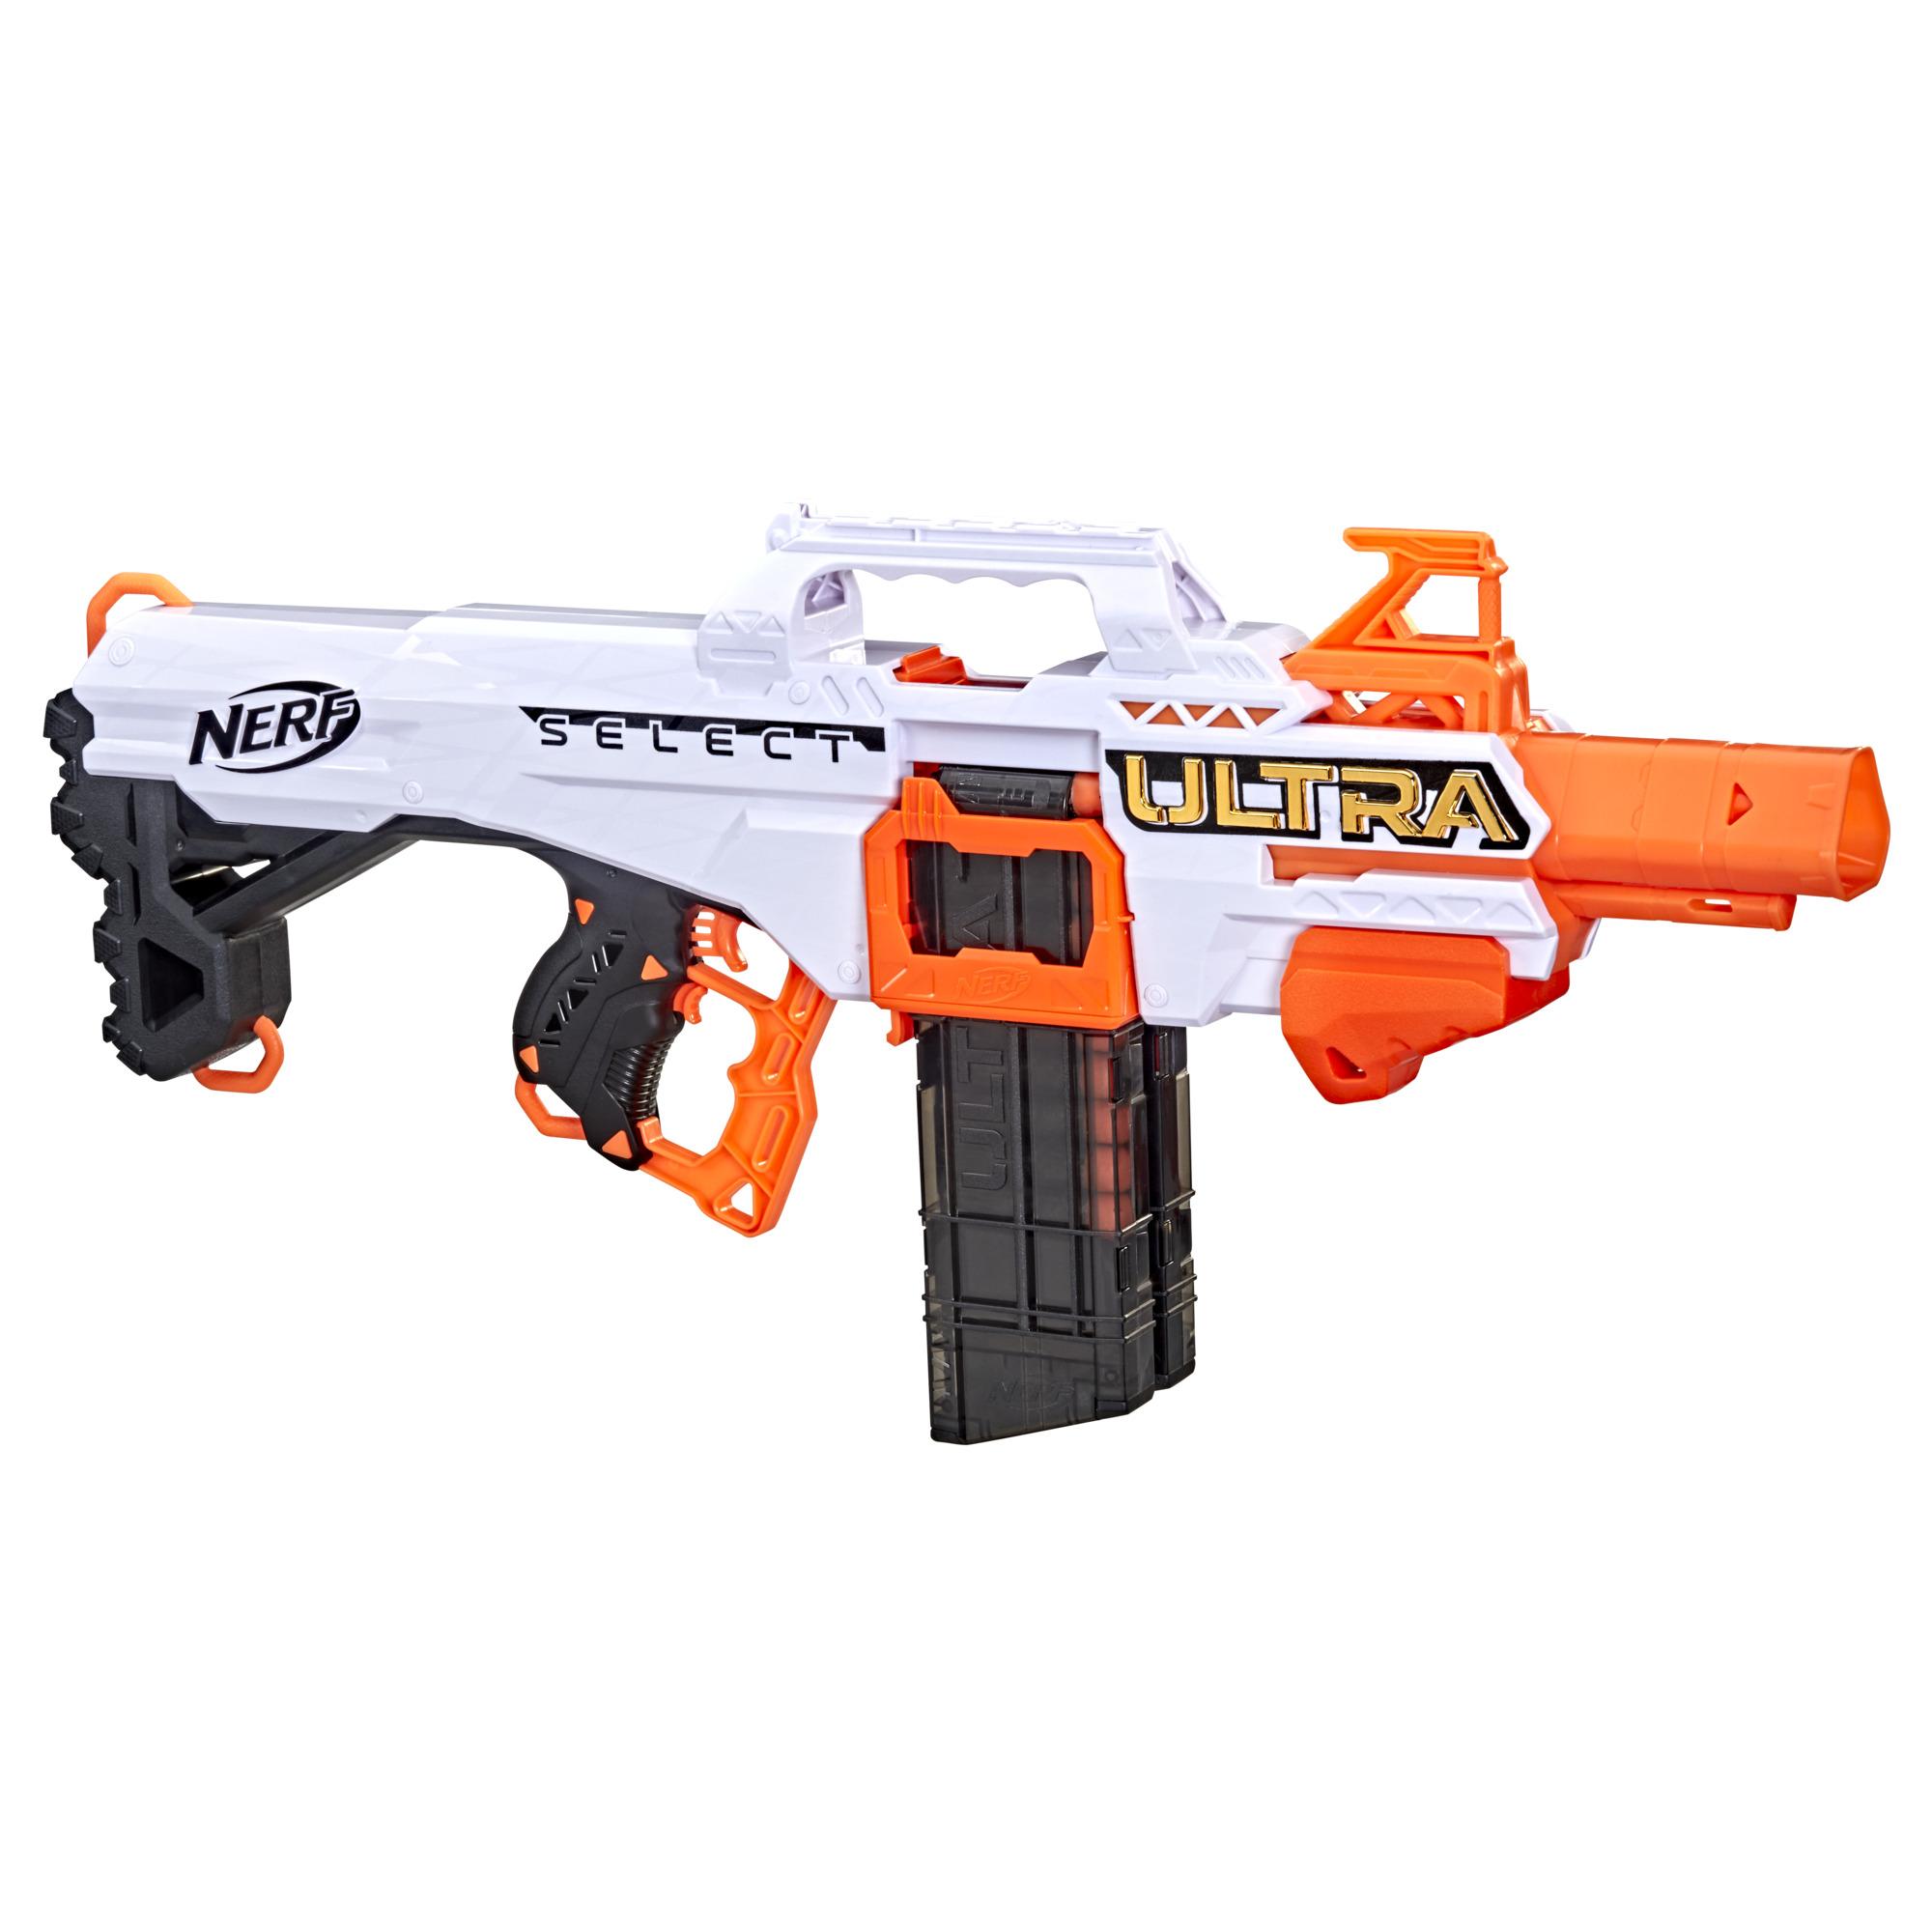 Nerf Ultra Select Fully Motorized Fire 2 Ways, Includes Clips and Compatible Only with Nerf | Nerf